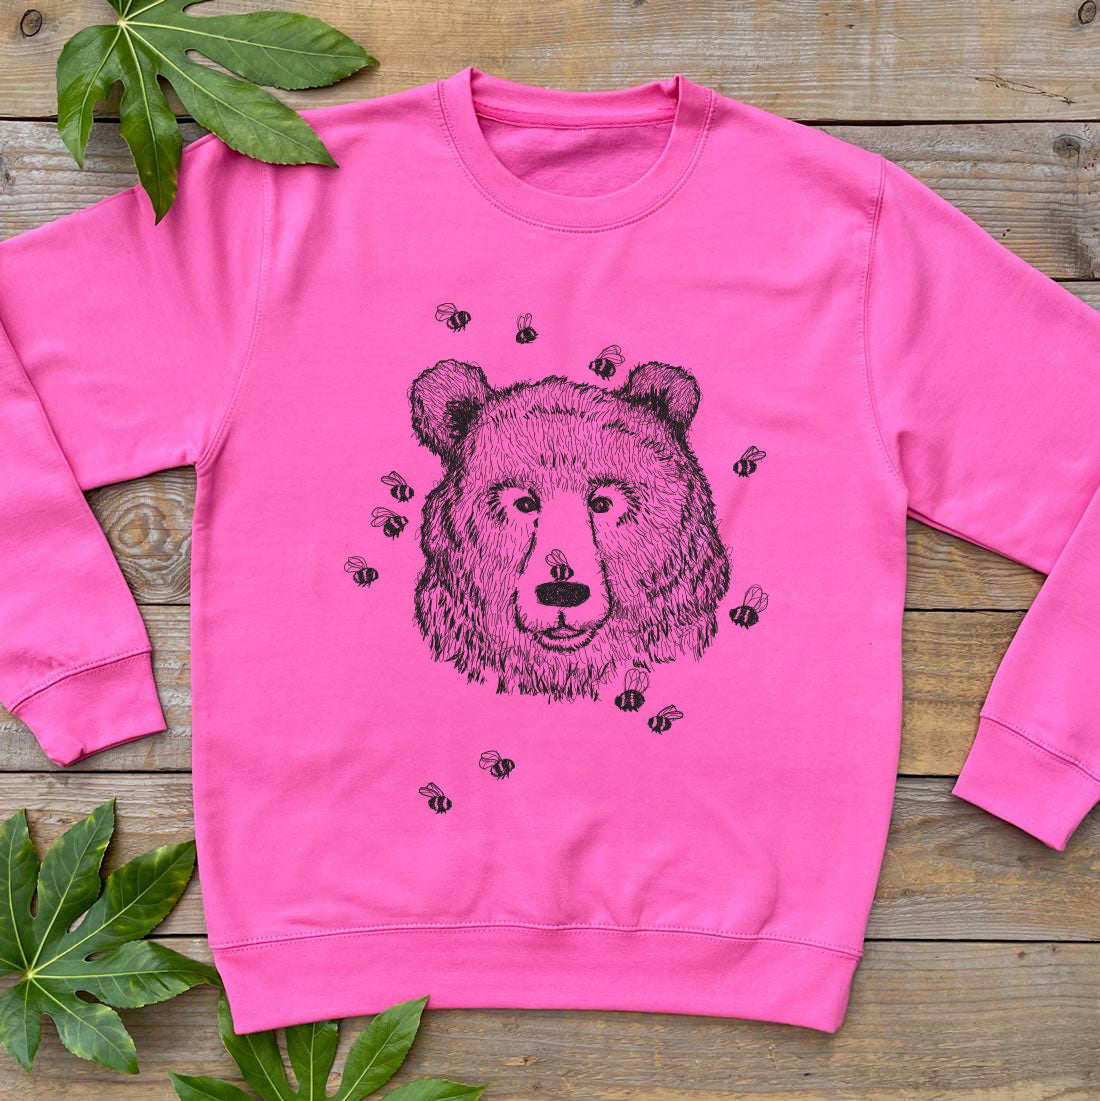 PINK JUMPER WITH BEES AND BEAR